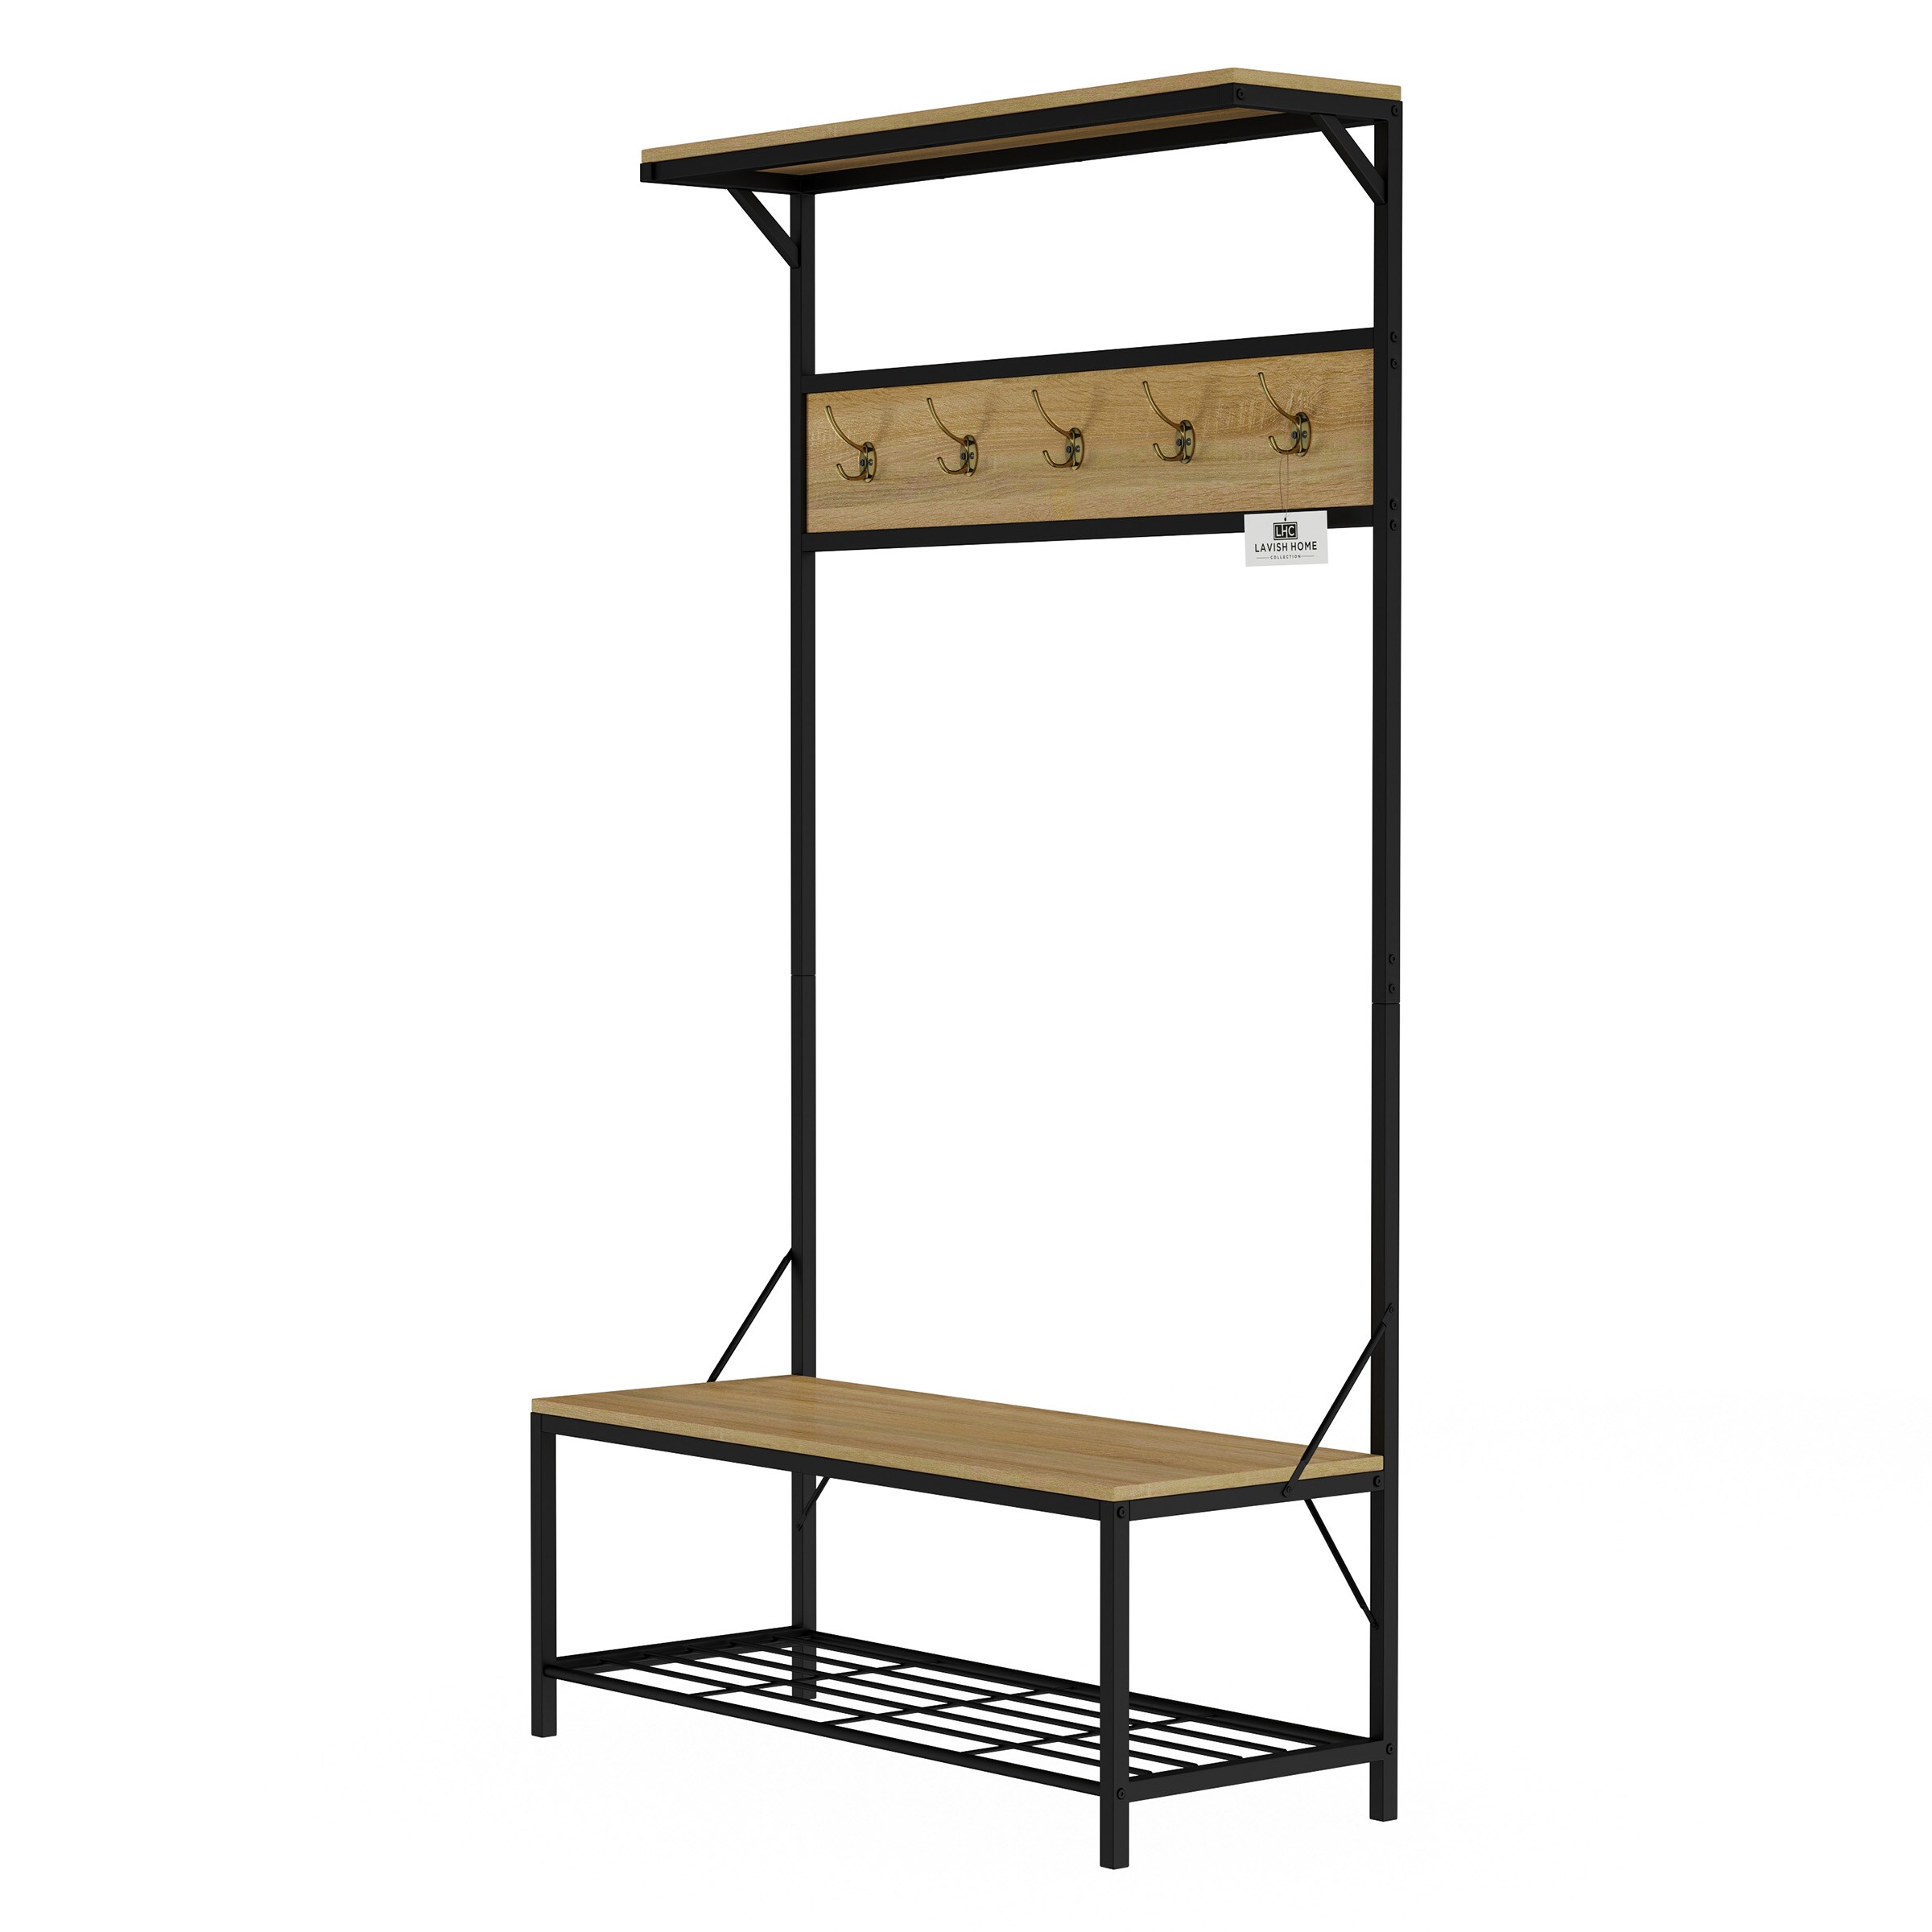 Hastings Home 3-in-1 Freestanding Entryway Storage Bench and Metal Hall  Tree Organizer- Sand/Black